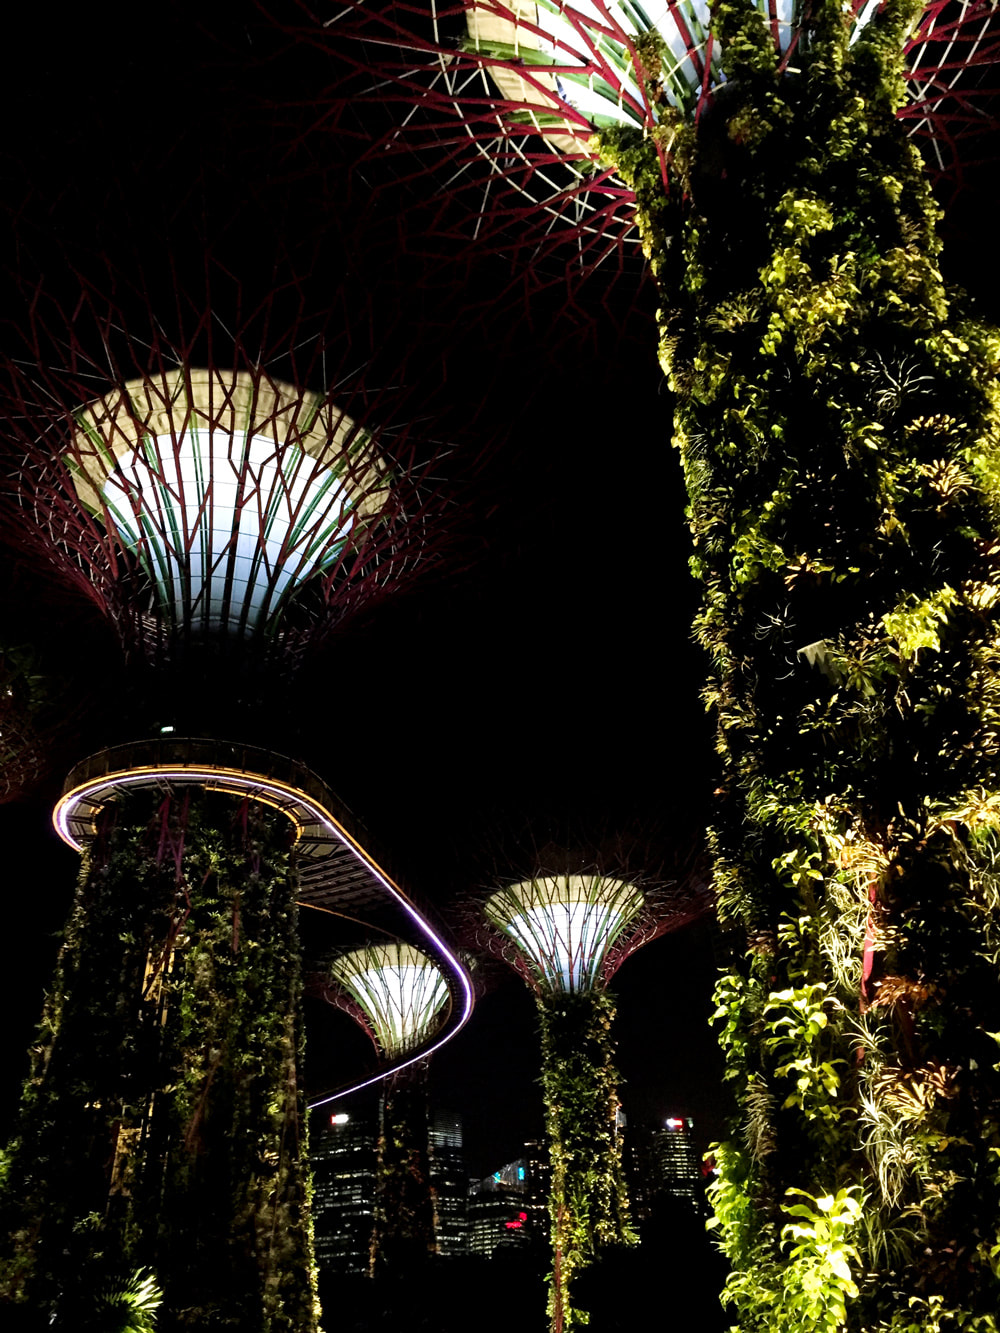 Supertree Grove, Singapore City skyline and the OCBC Skyway at night - Gardens by the Bay, Singapore.